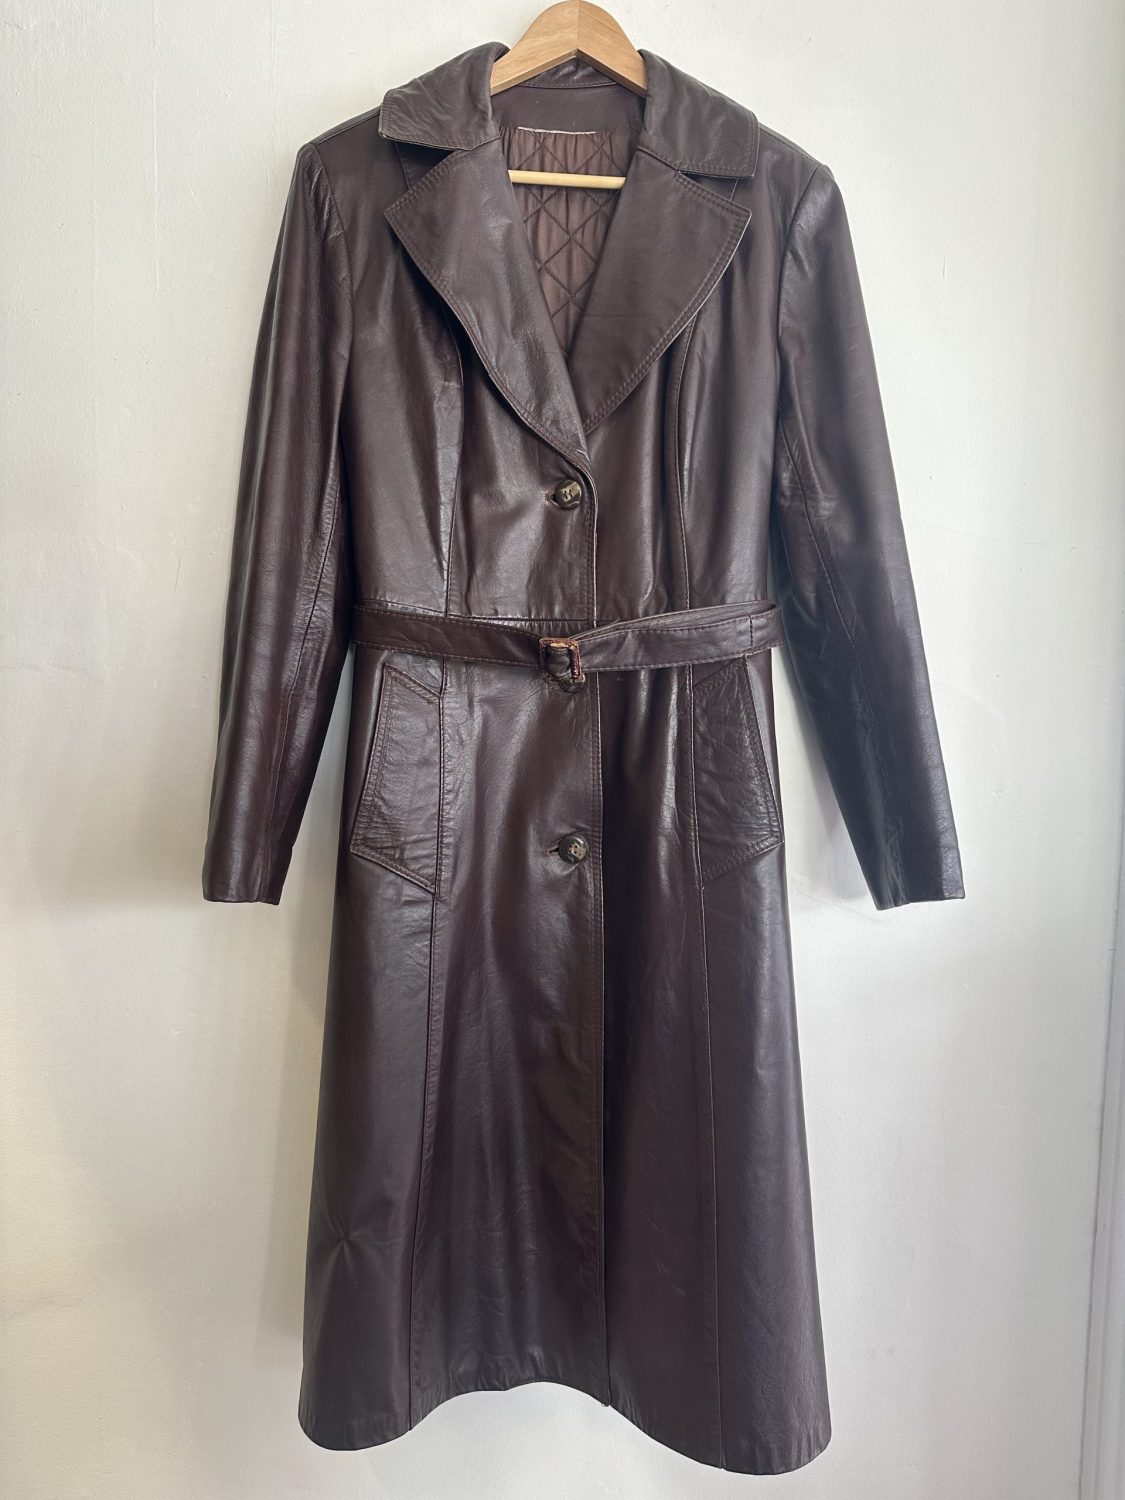 RICH BROWN VINTAGE LONG LEATHER TRENCH COAT | Chaos Bazaar Vintage